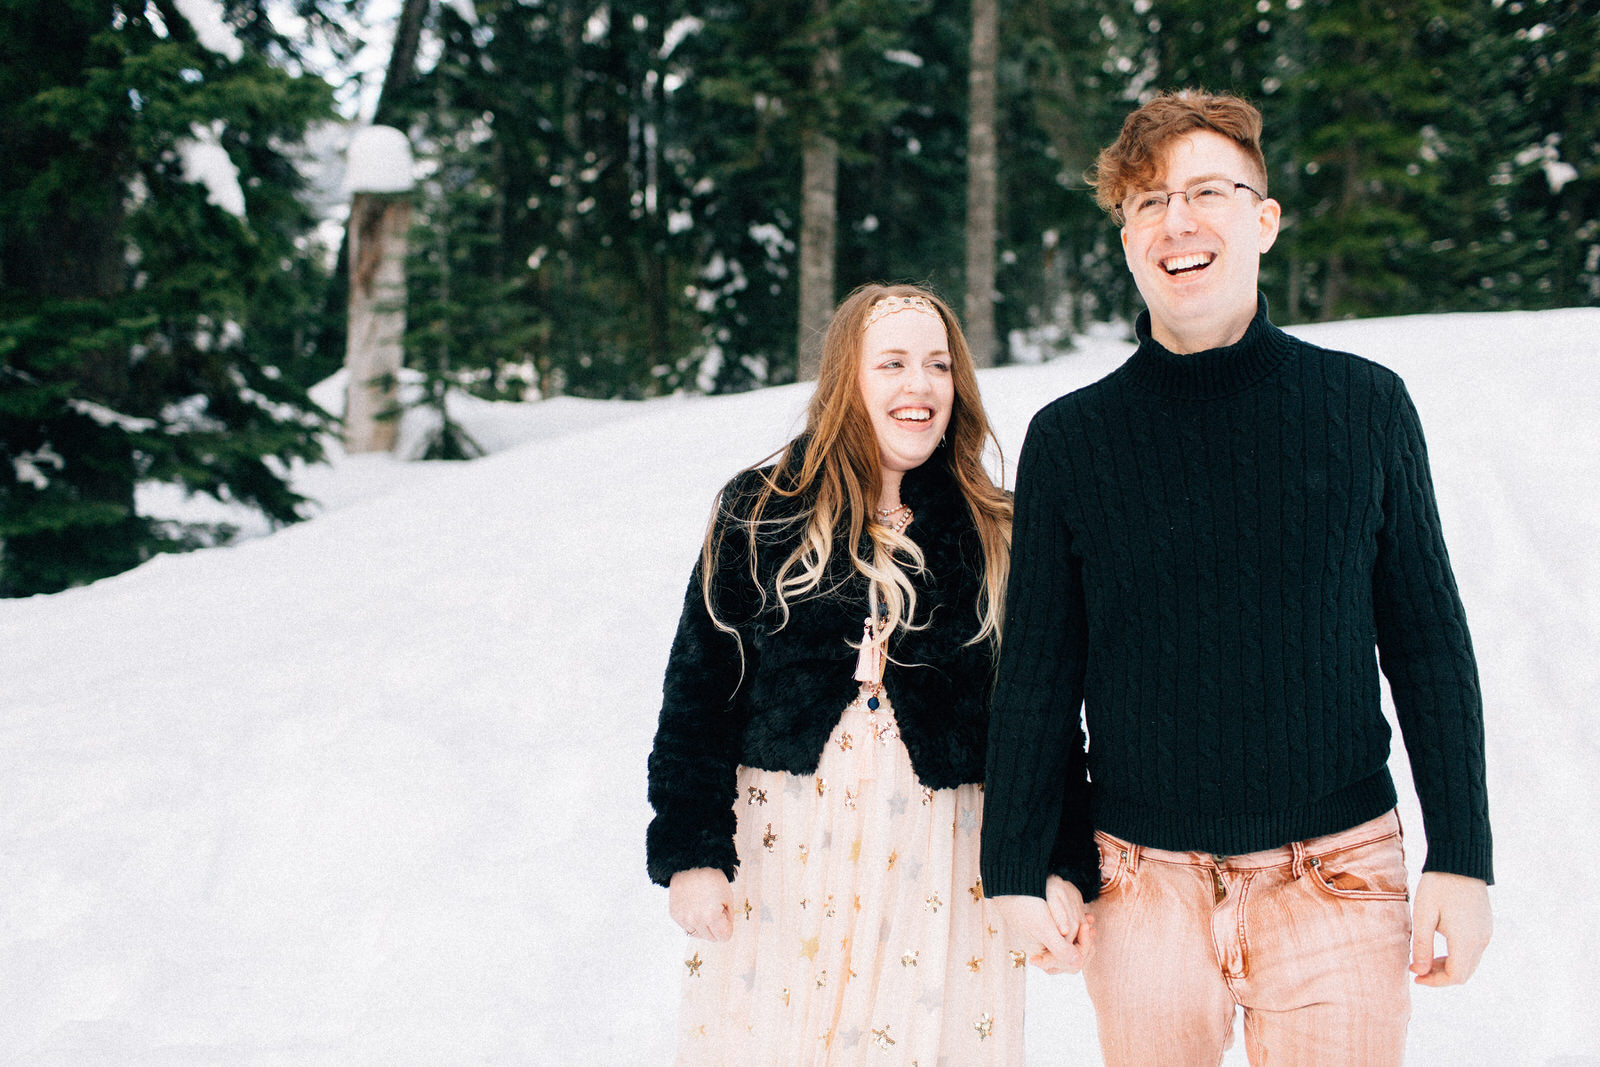 Snoqualmie Pass fuck yeah weddings engagement session snow mountains kendall shea feminist phtographer